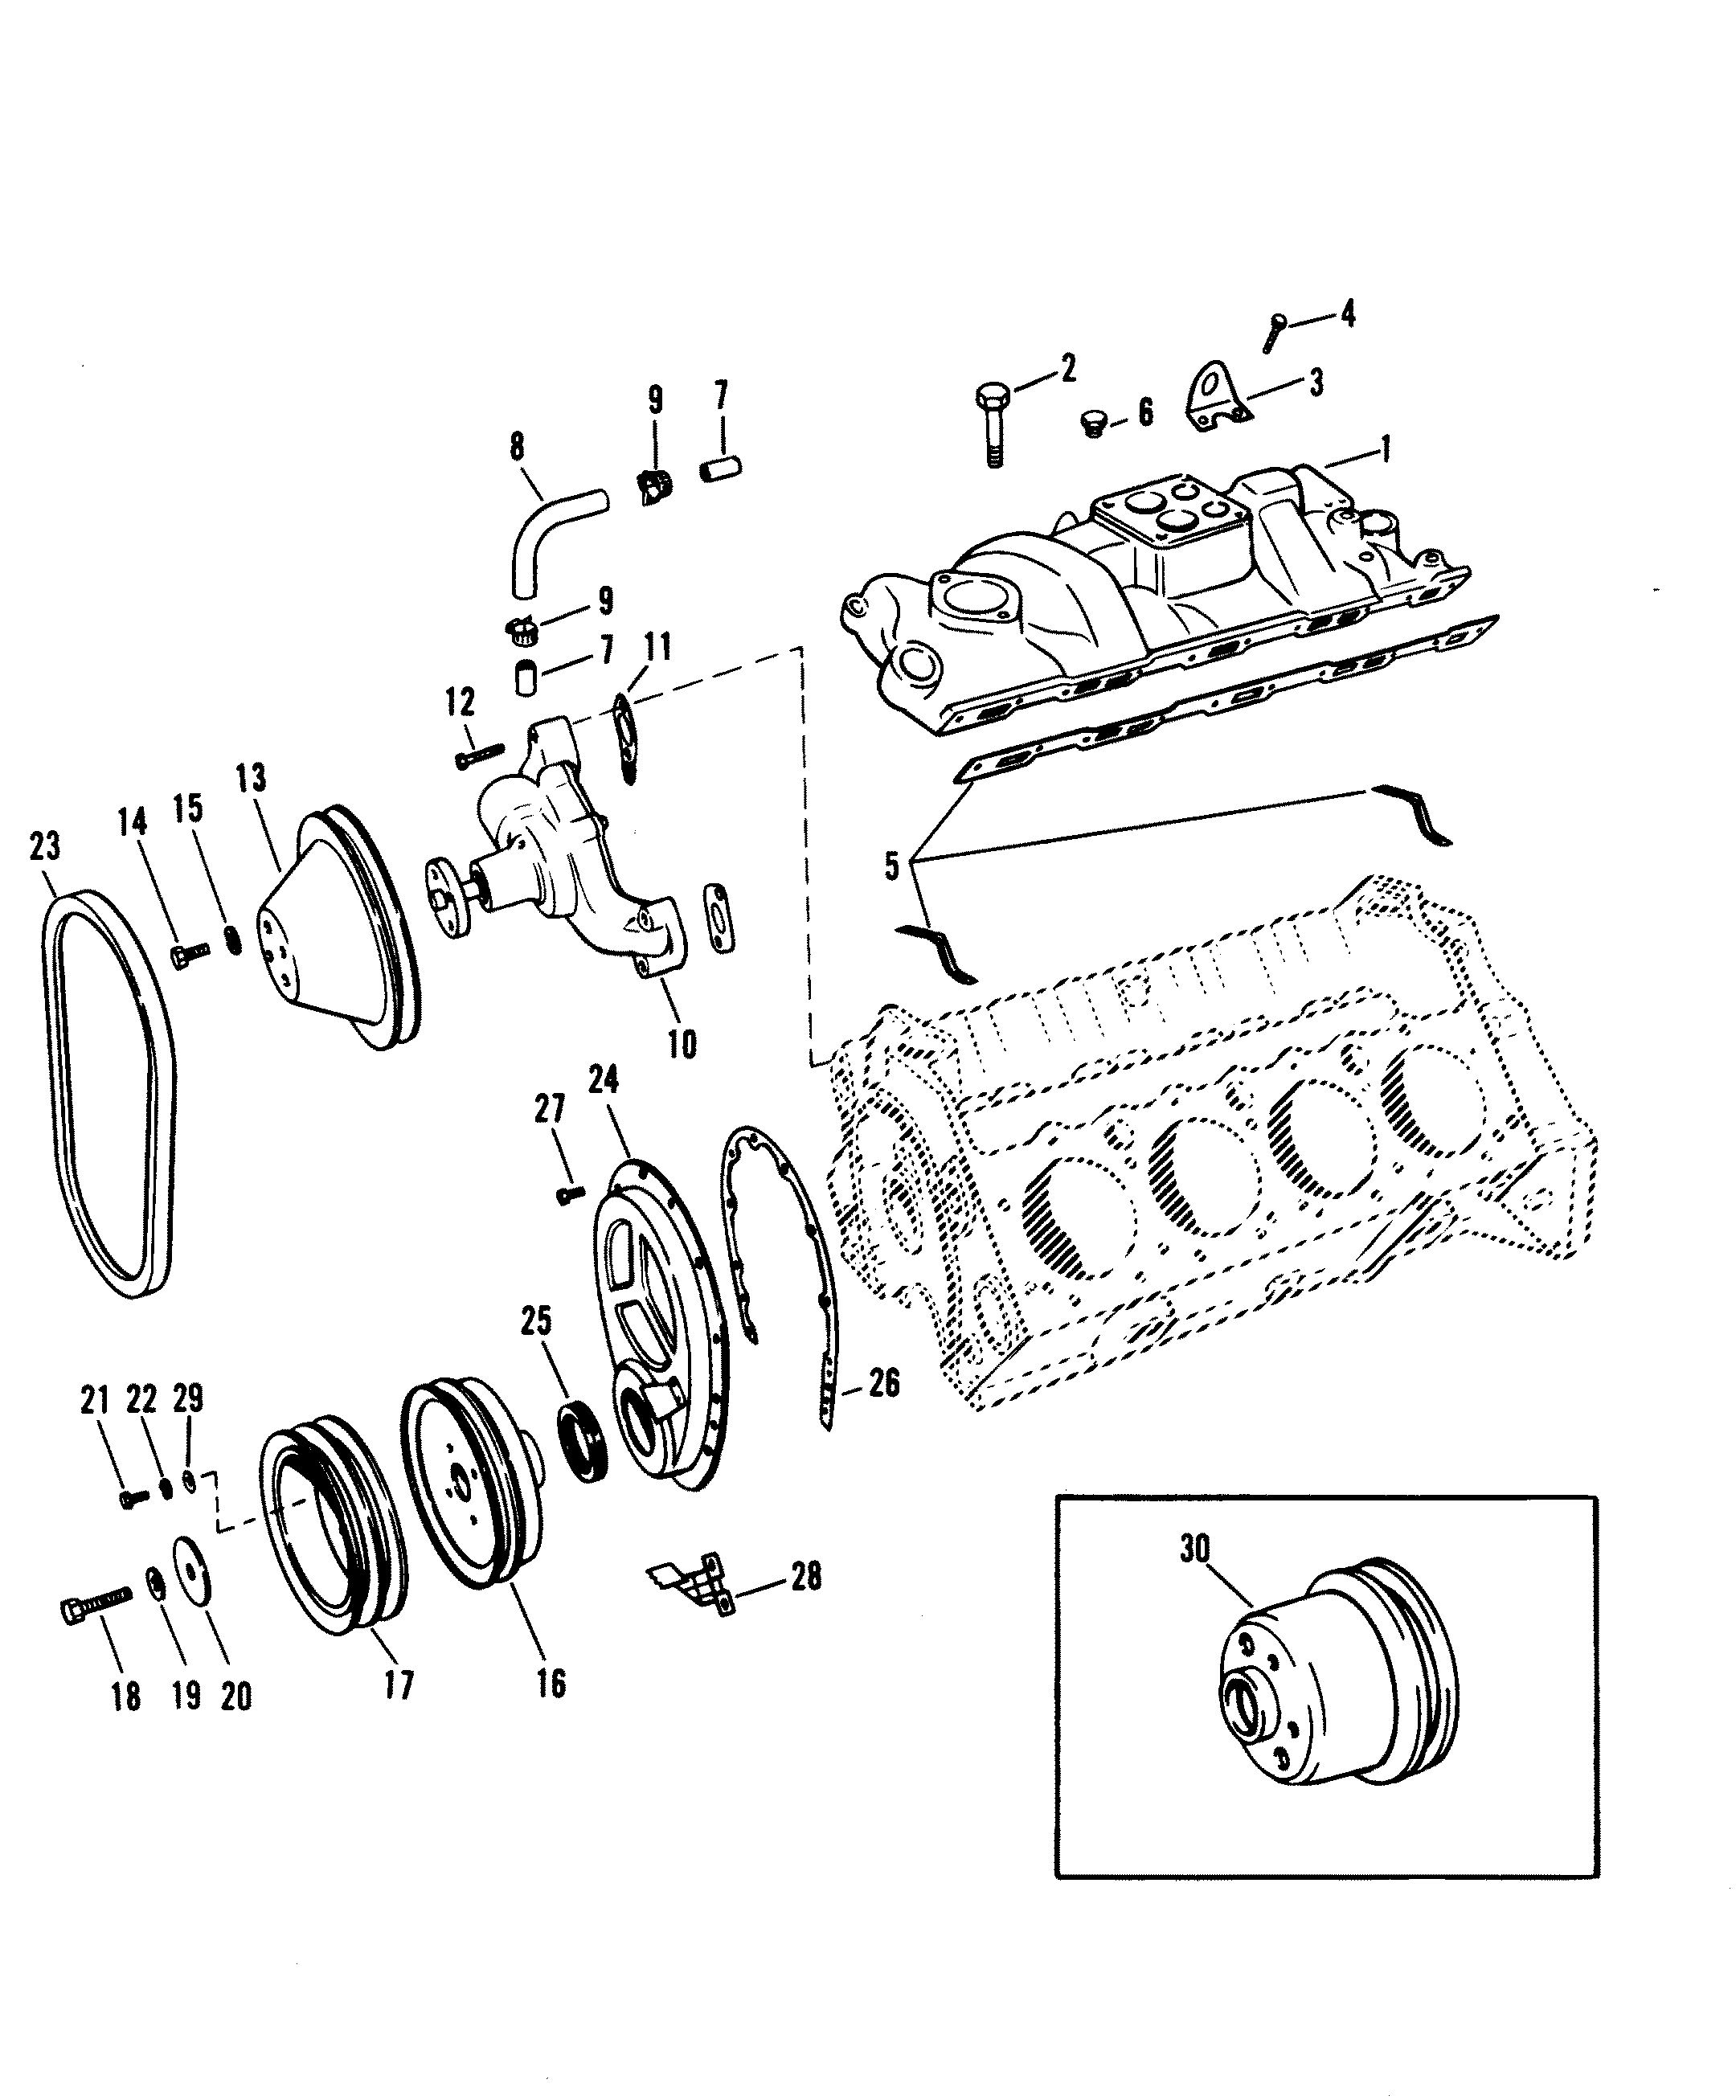 INTAKE MANIFOLD AND FRONT COVER